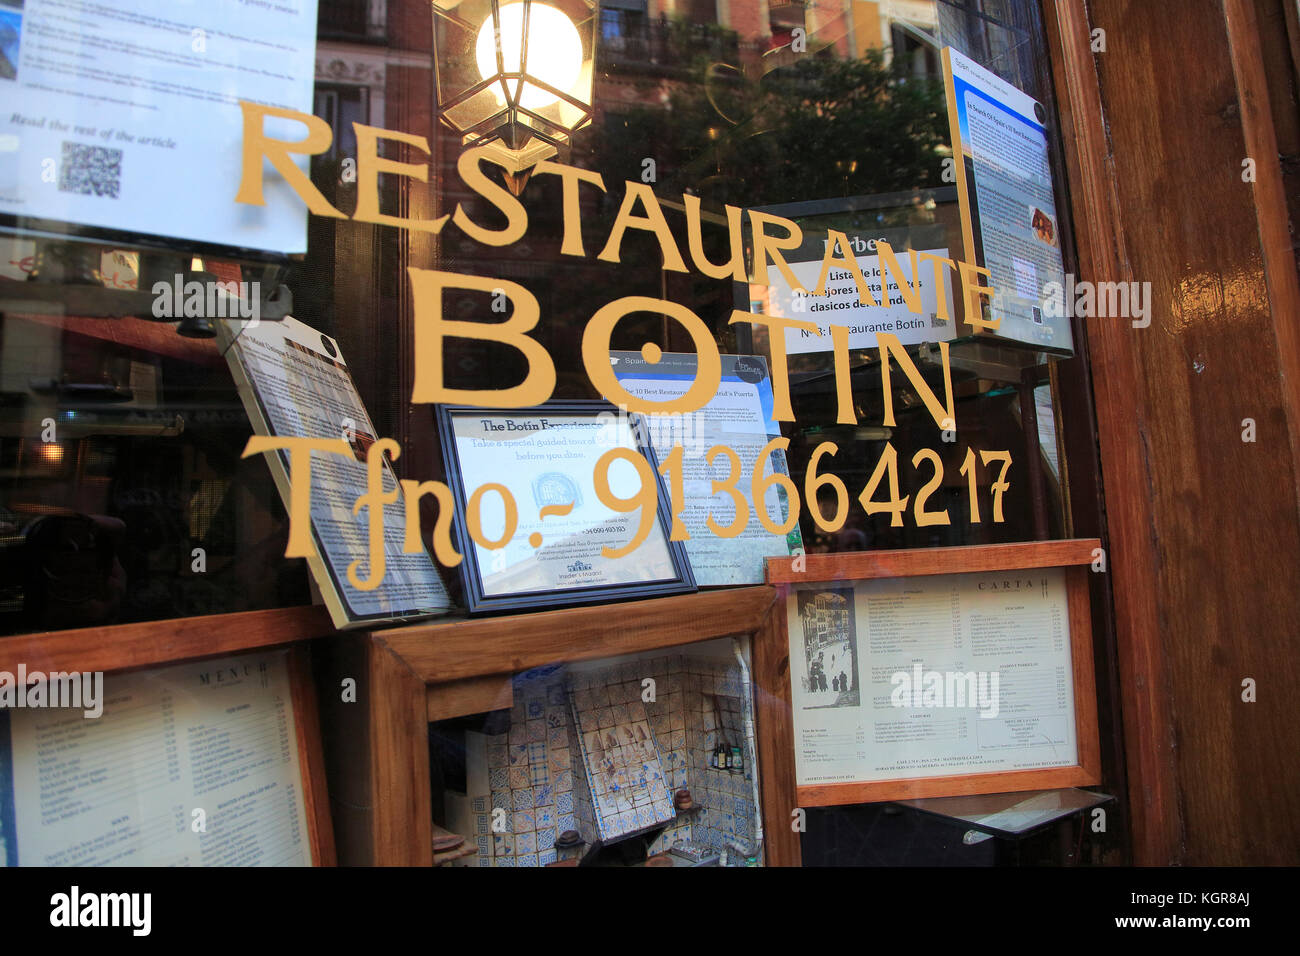 Restaurant Sobrino de Botin, Madrid city centre, Spain from 1725 claims to be one of world's oldest restaurants Stock Photo